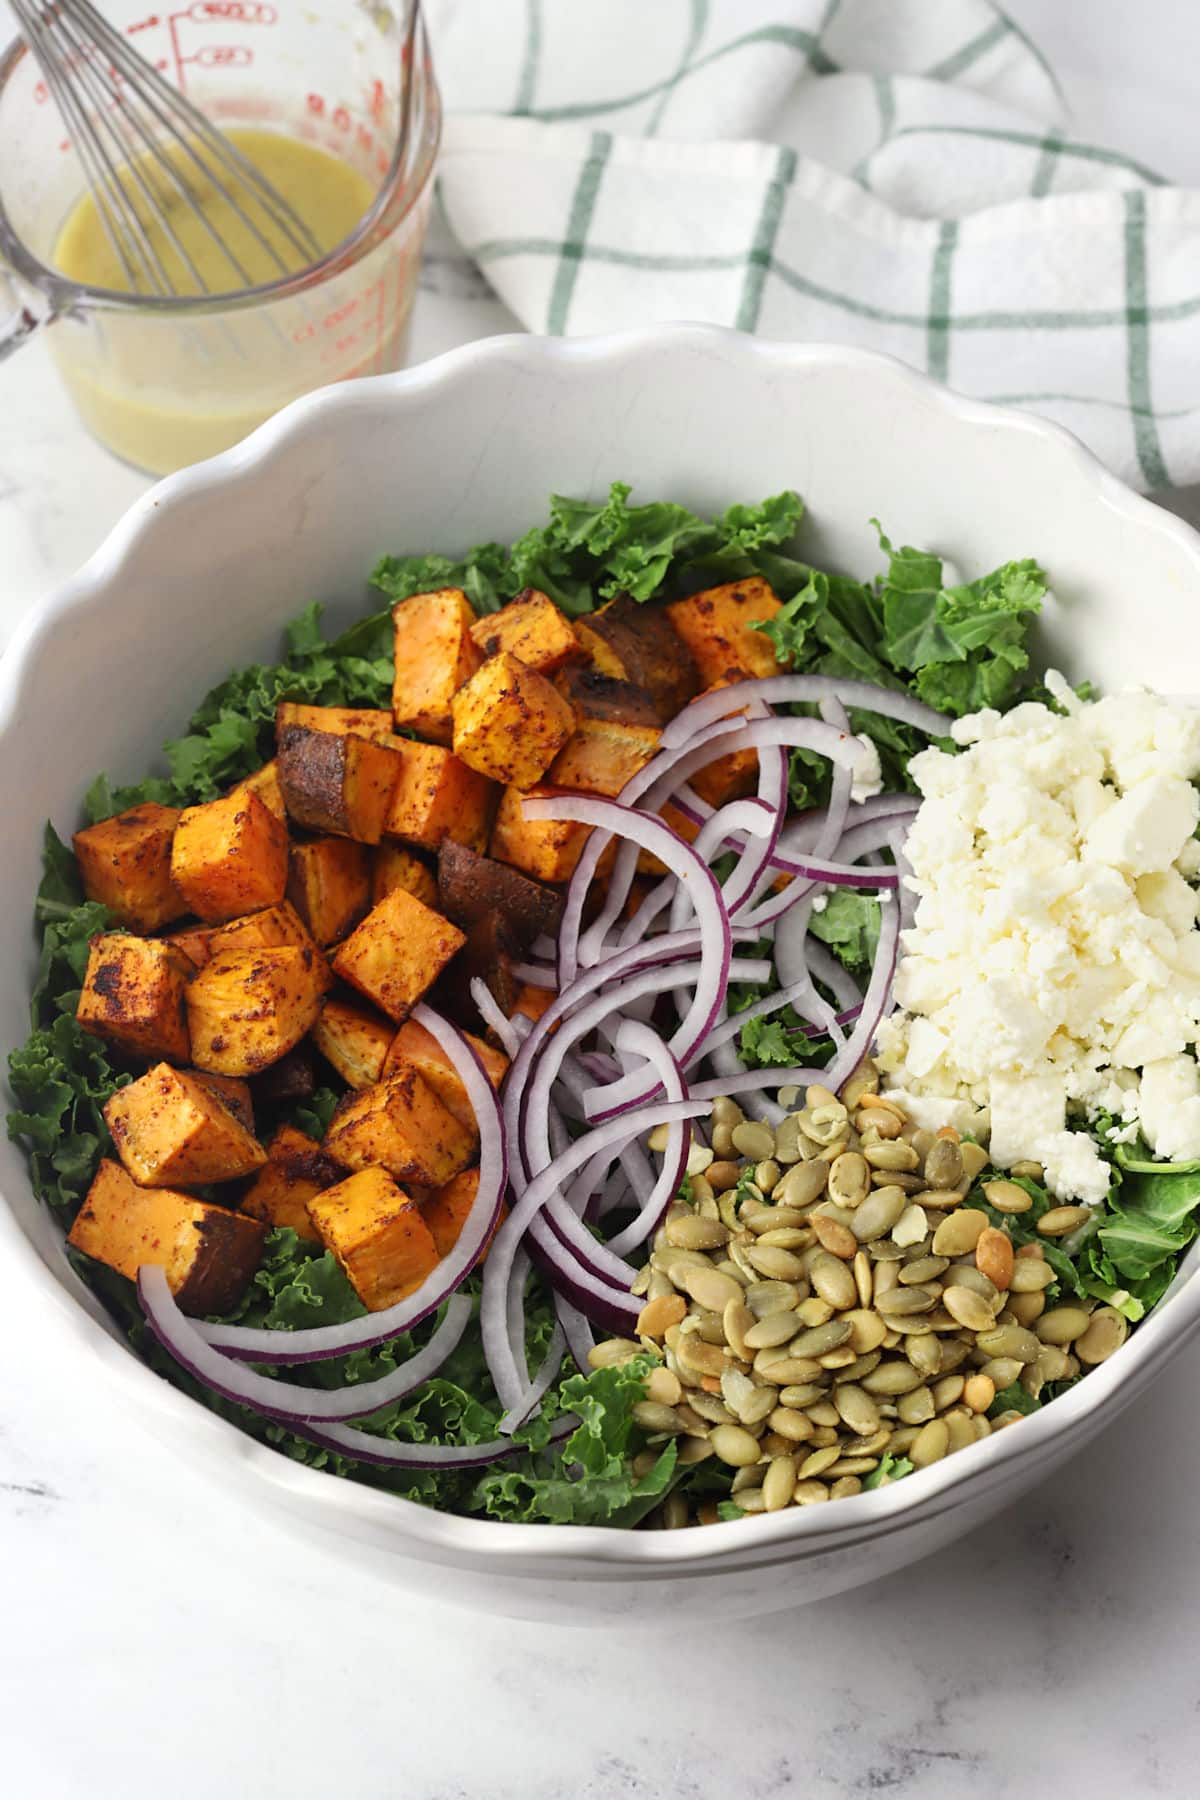 Sweet potatoes, feta cheese, onions, and pepitas on a bed of kale in a bowl.